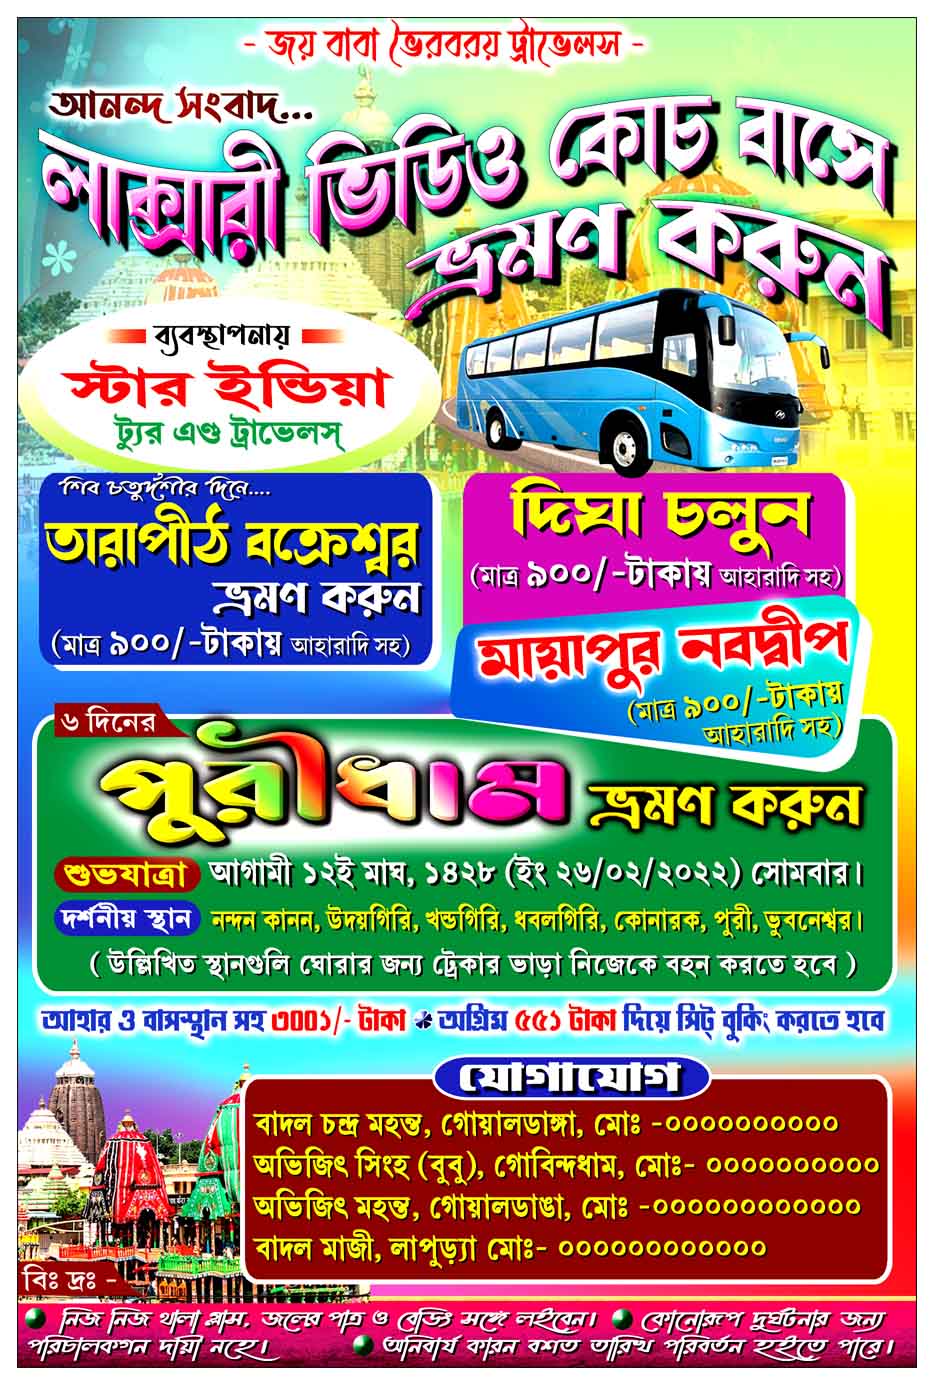 travel agent meaning of bengali